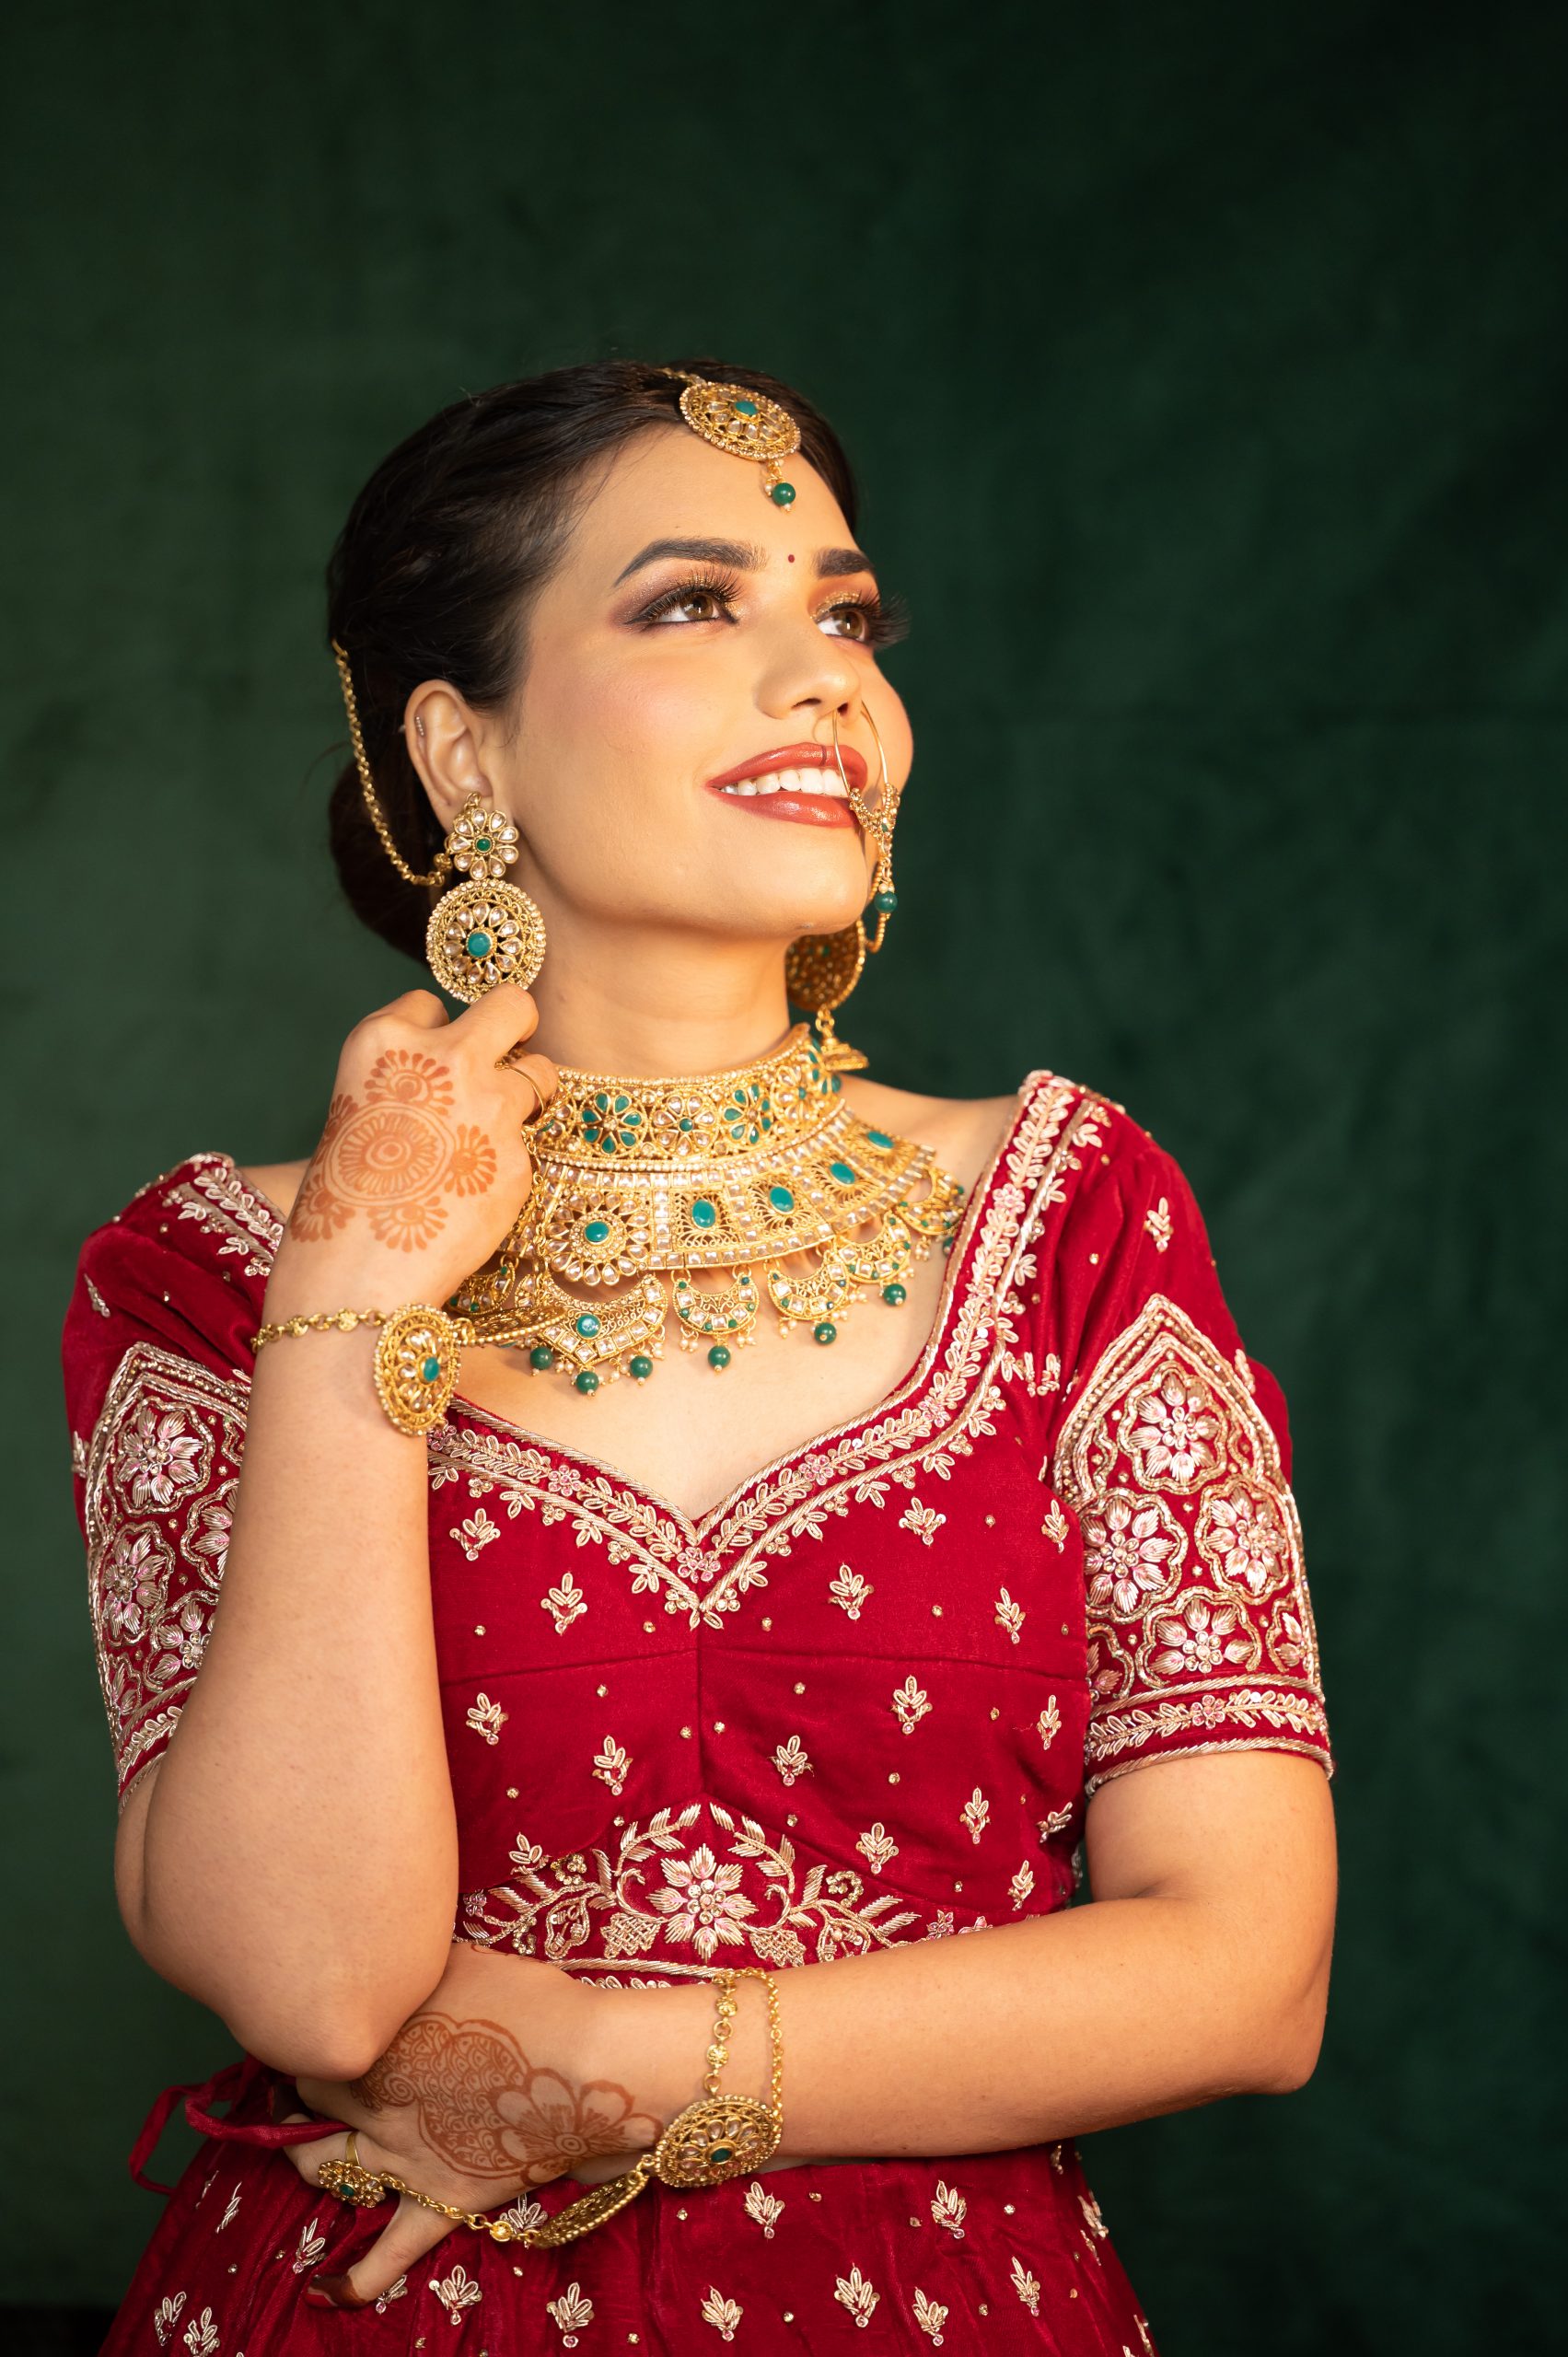 Home salon service in Lucknow bridal makeup